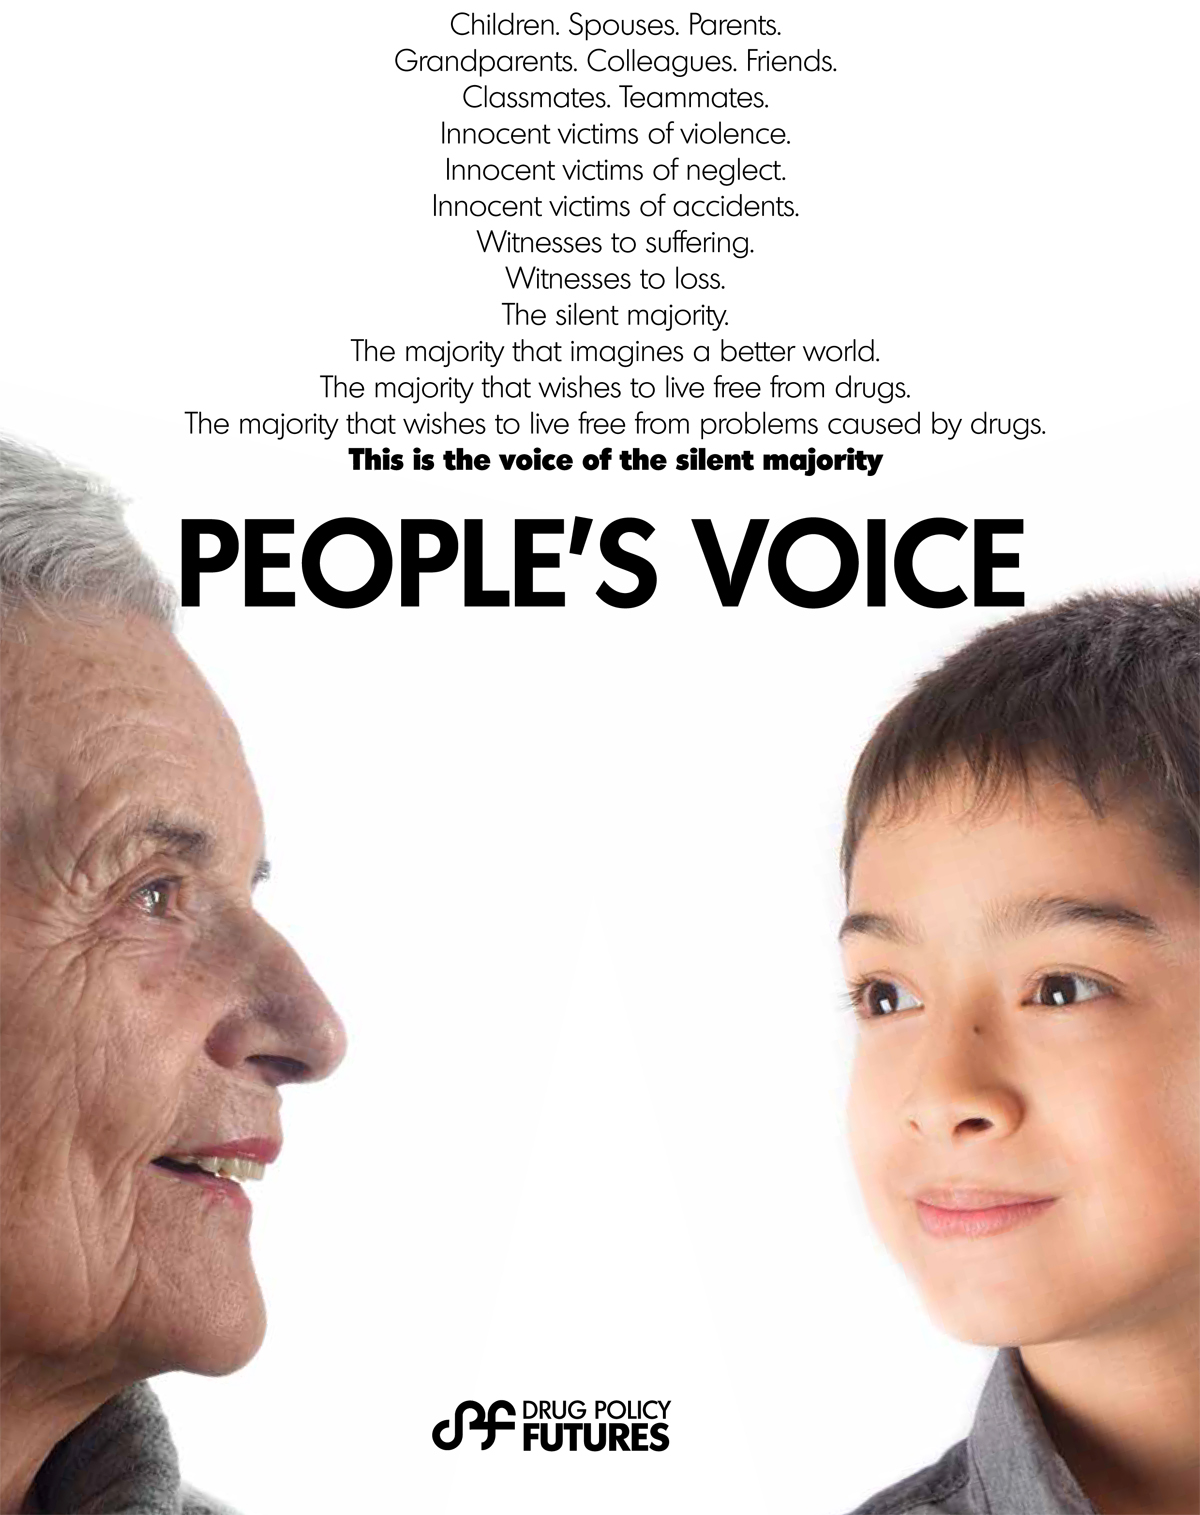 Page 6 1200p - DPF report 2019 - Peoples' Voice-6.jpg